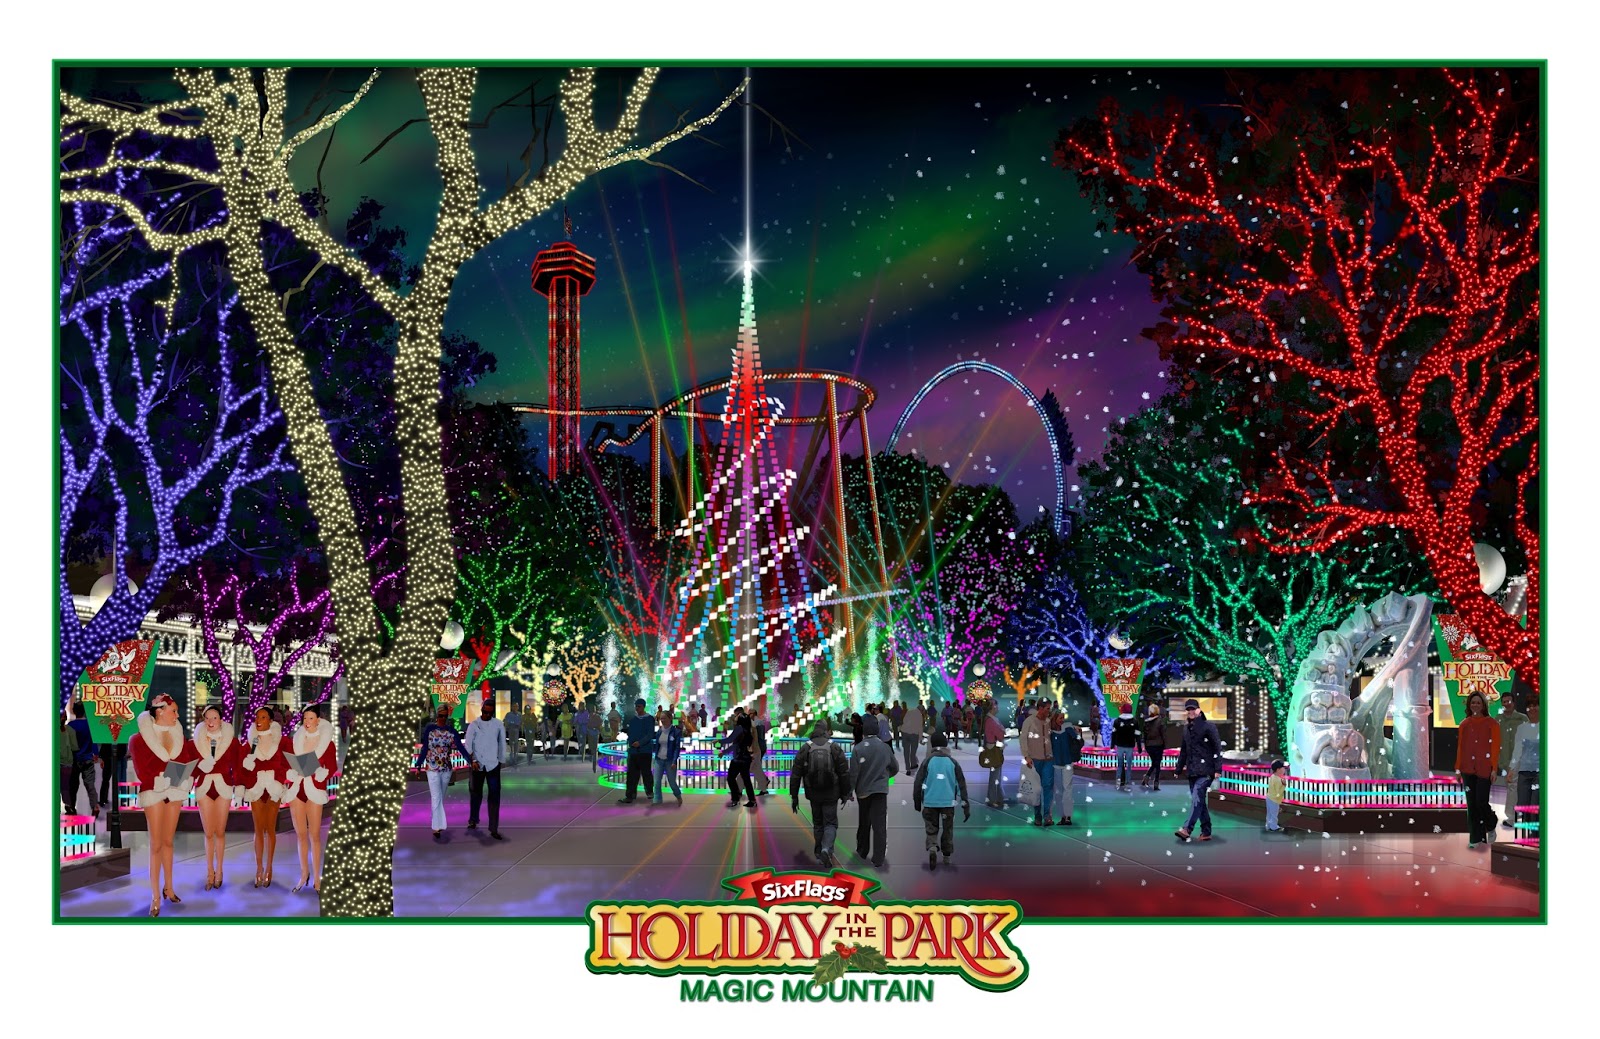 NewsPlusNotes: Six Flags Magic Mountain Announces Holiday In the Park for Winter 2014